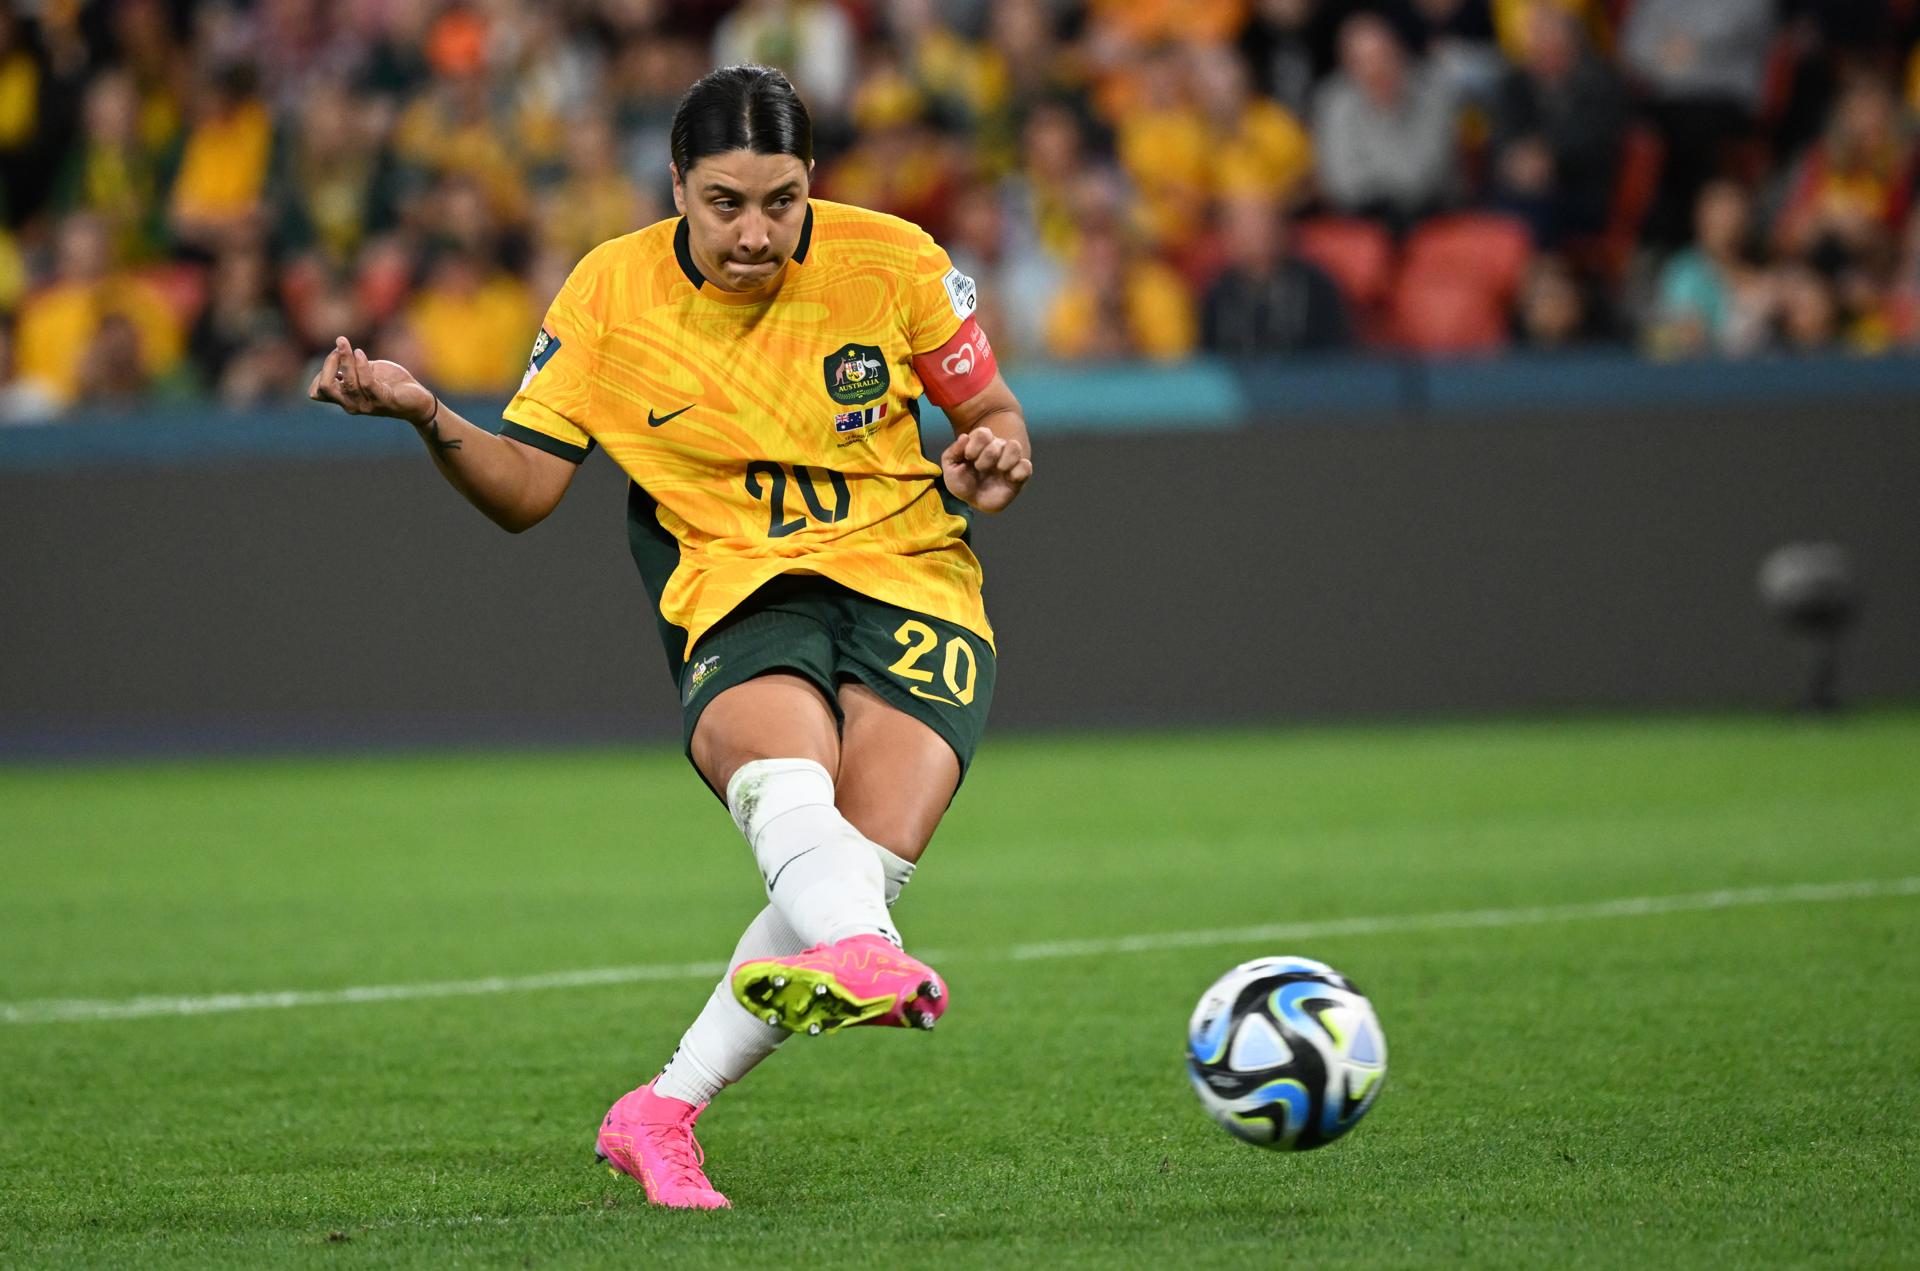 Sam Kerr of Australia scores a goal during a penalty shootout against France in the quarterfinals of the FIFA Women's World Cup 2023 in Brisbane, Australia, 12 August 2023. Australia won the shootout 7-6 after neither team had scored in regulation or extra time. EFE/EPA/DARREN ENGLAND AUSTRALIA AND NEW ZEALAND OUT
